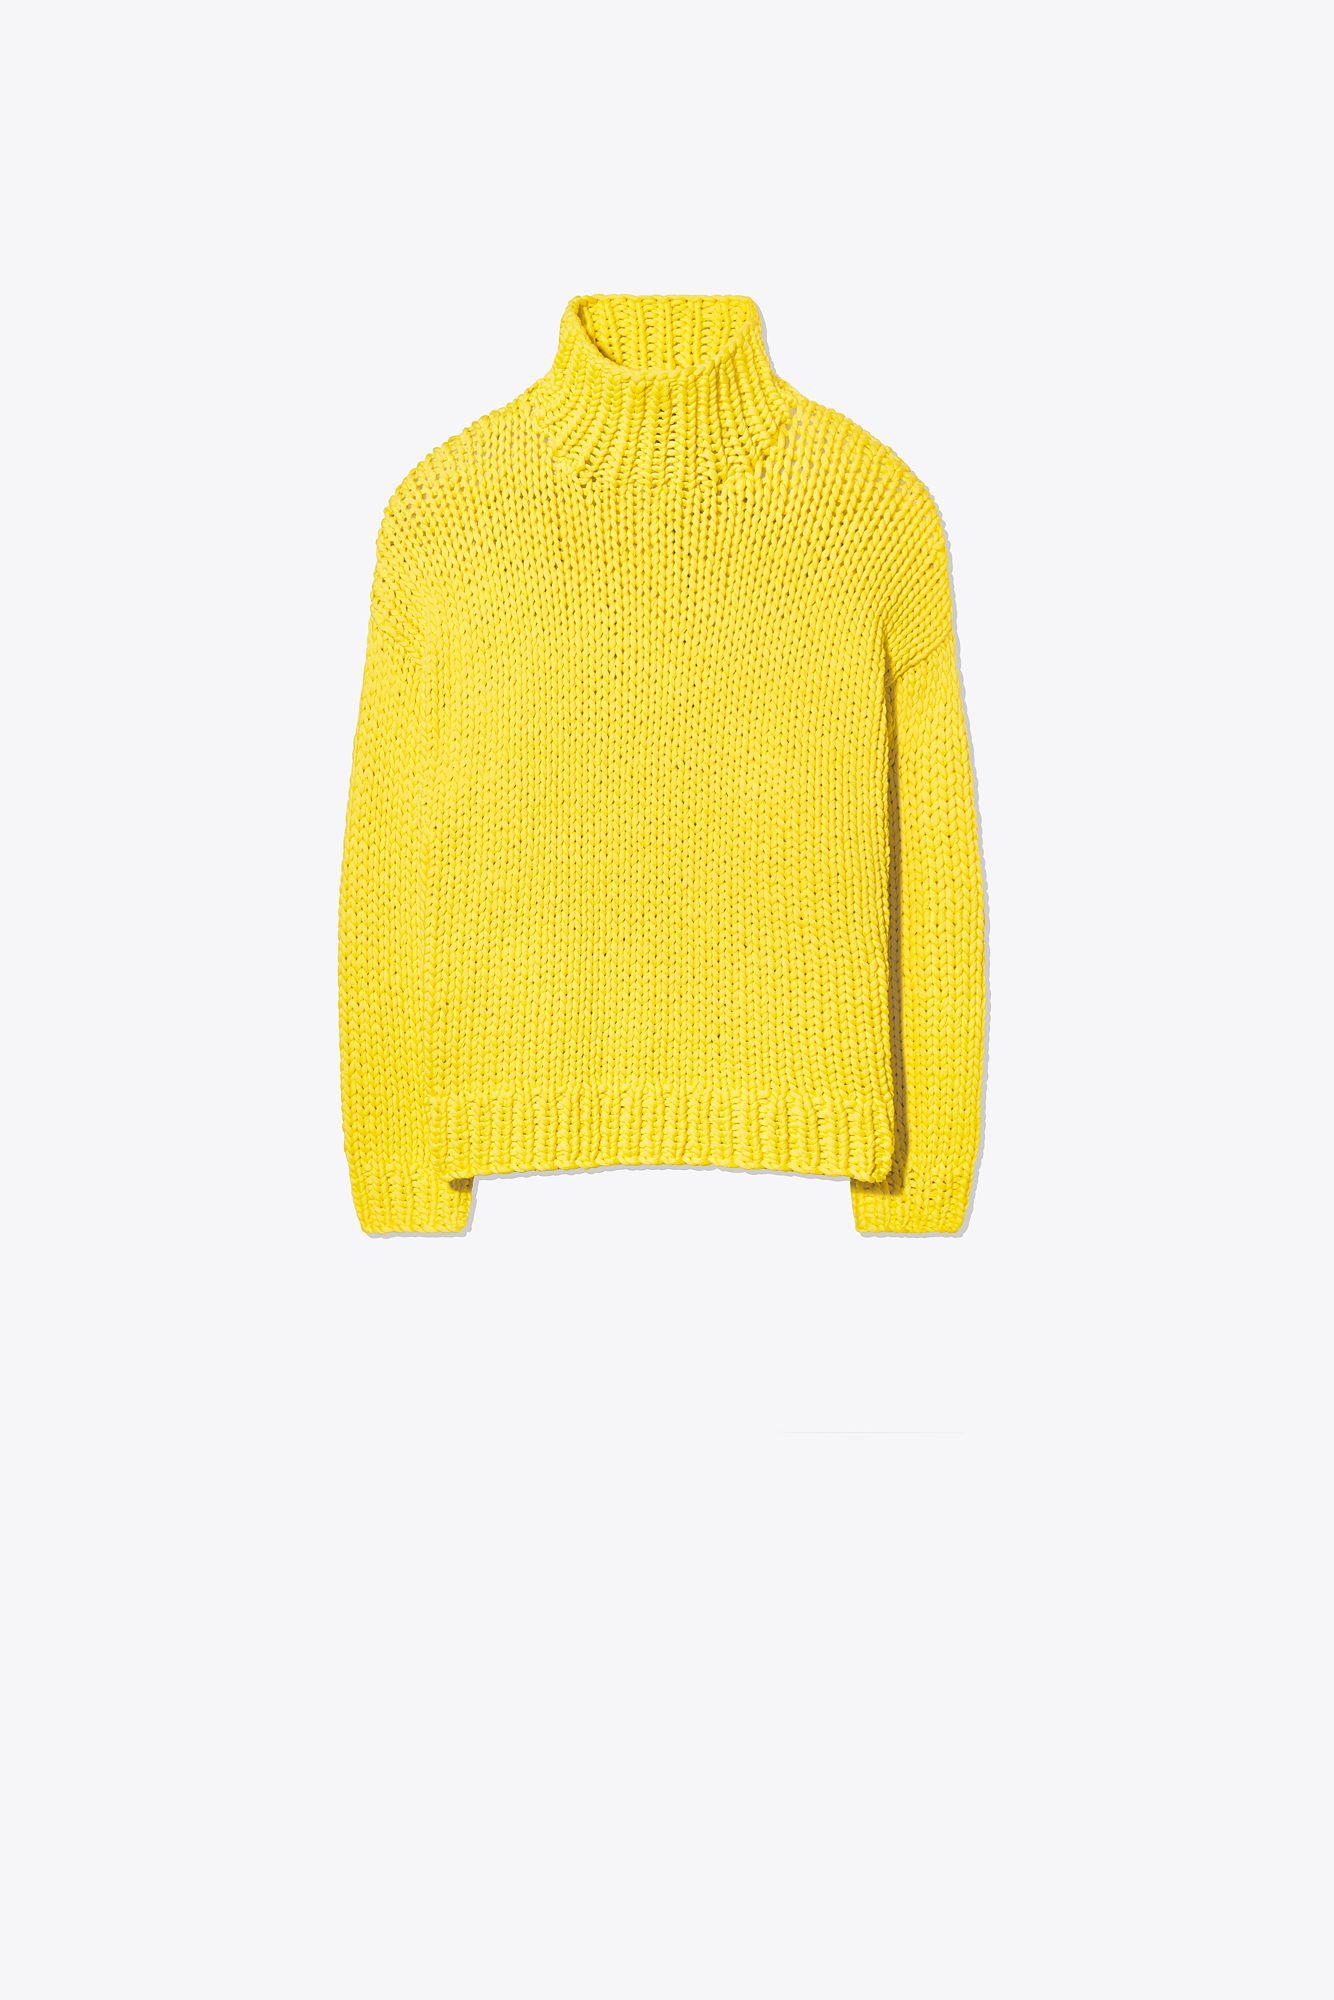 Tory Sport Hand-knit Sweater in Yellow | Lyst Canada